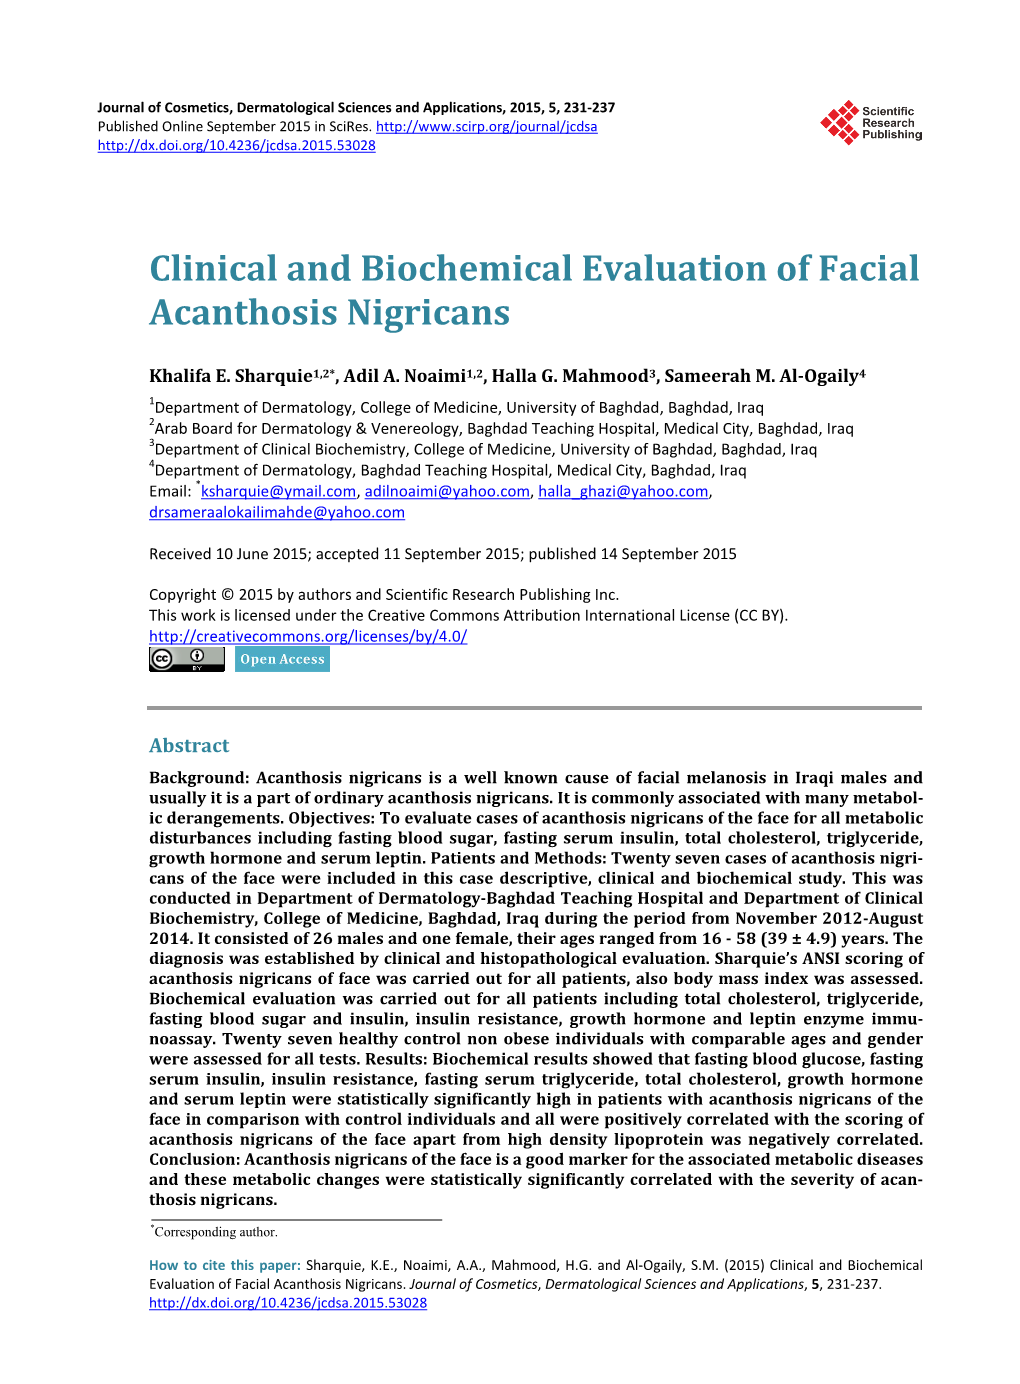 Clinical and Biochemical Evaluation of Facial Acanthosis Nigricans